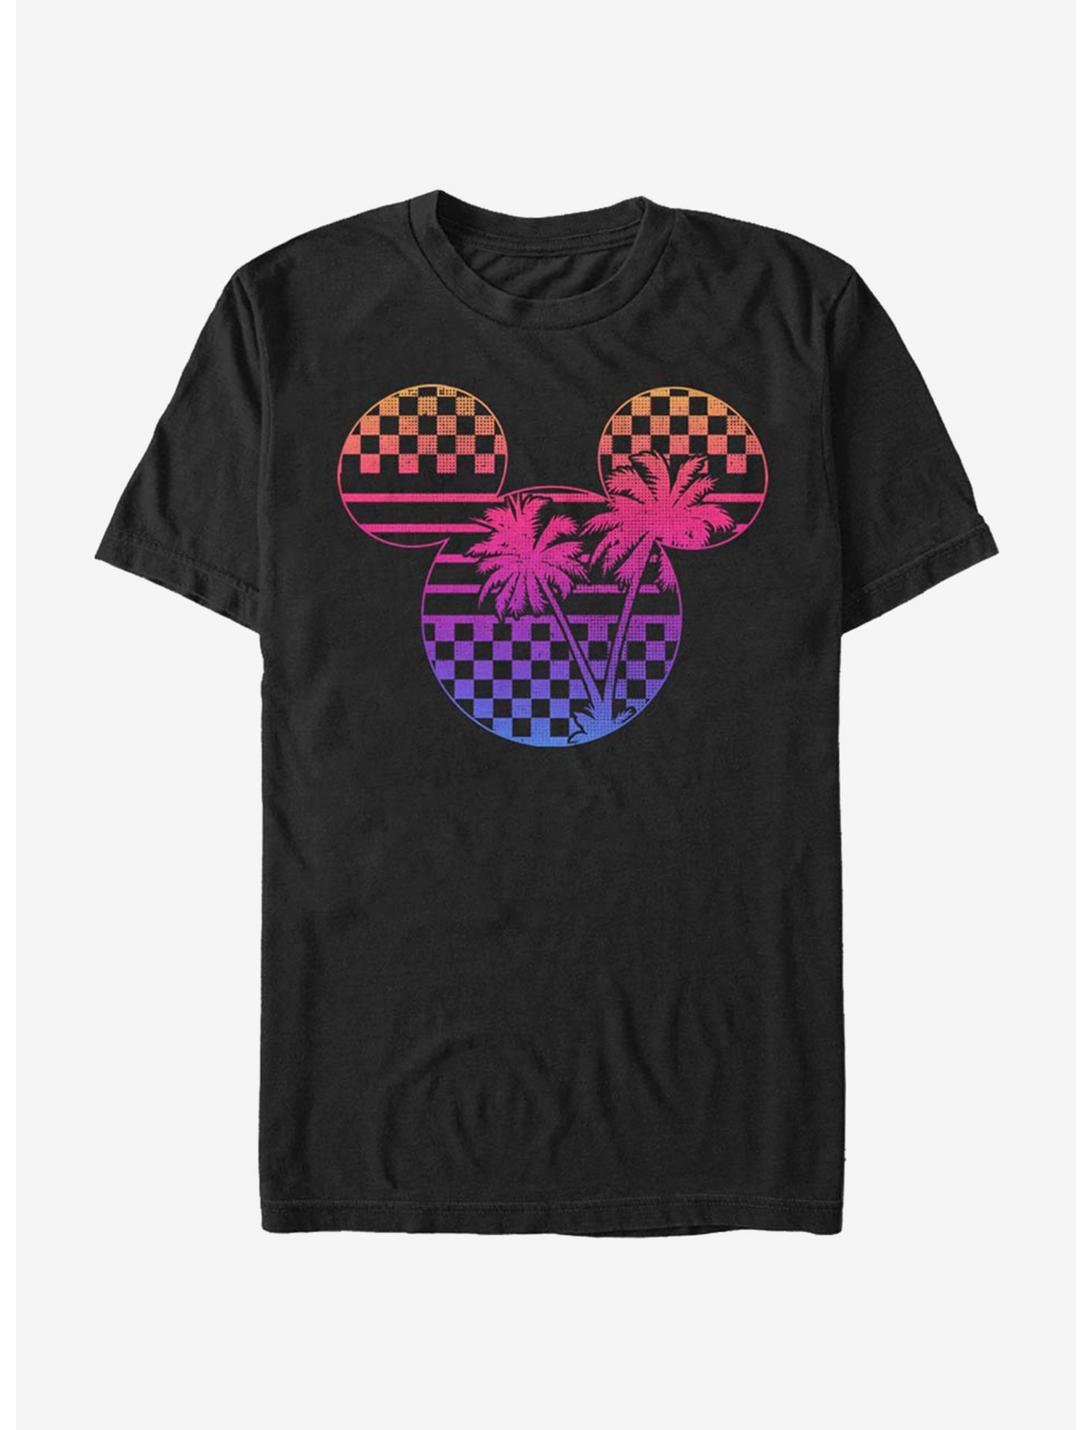 Disney Mickey Mouse Roadster Palm Mickey T-Shirt, BLACK, hi-res